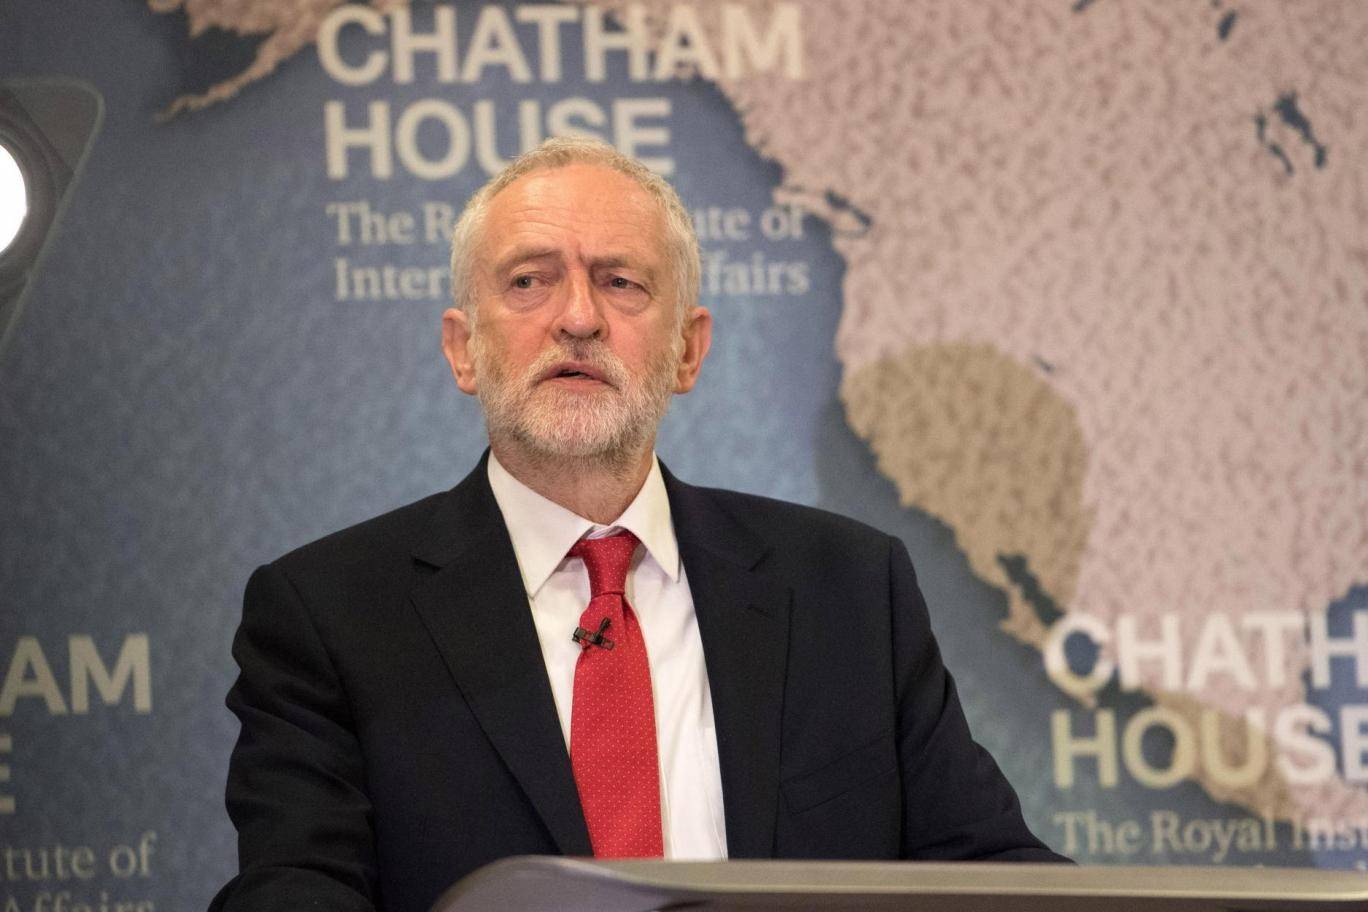 Jeremy Corbyn says Britain has not fought a just war since 1945